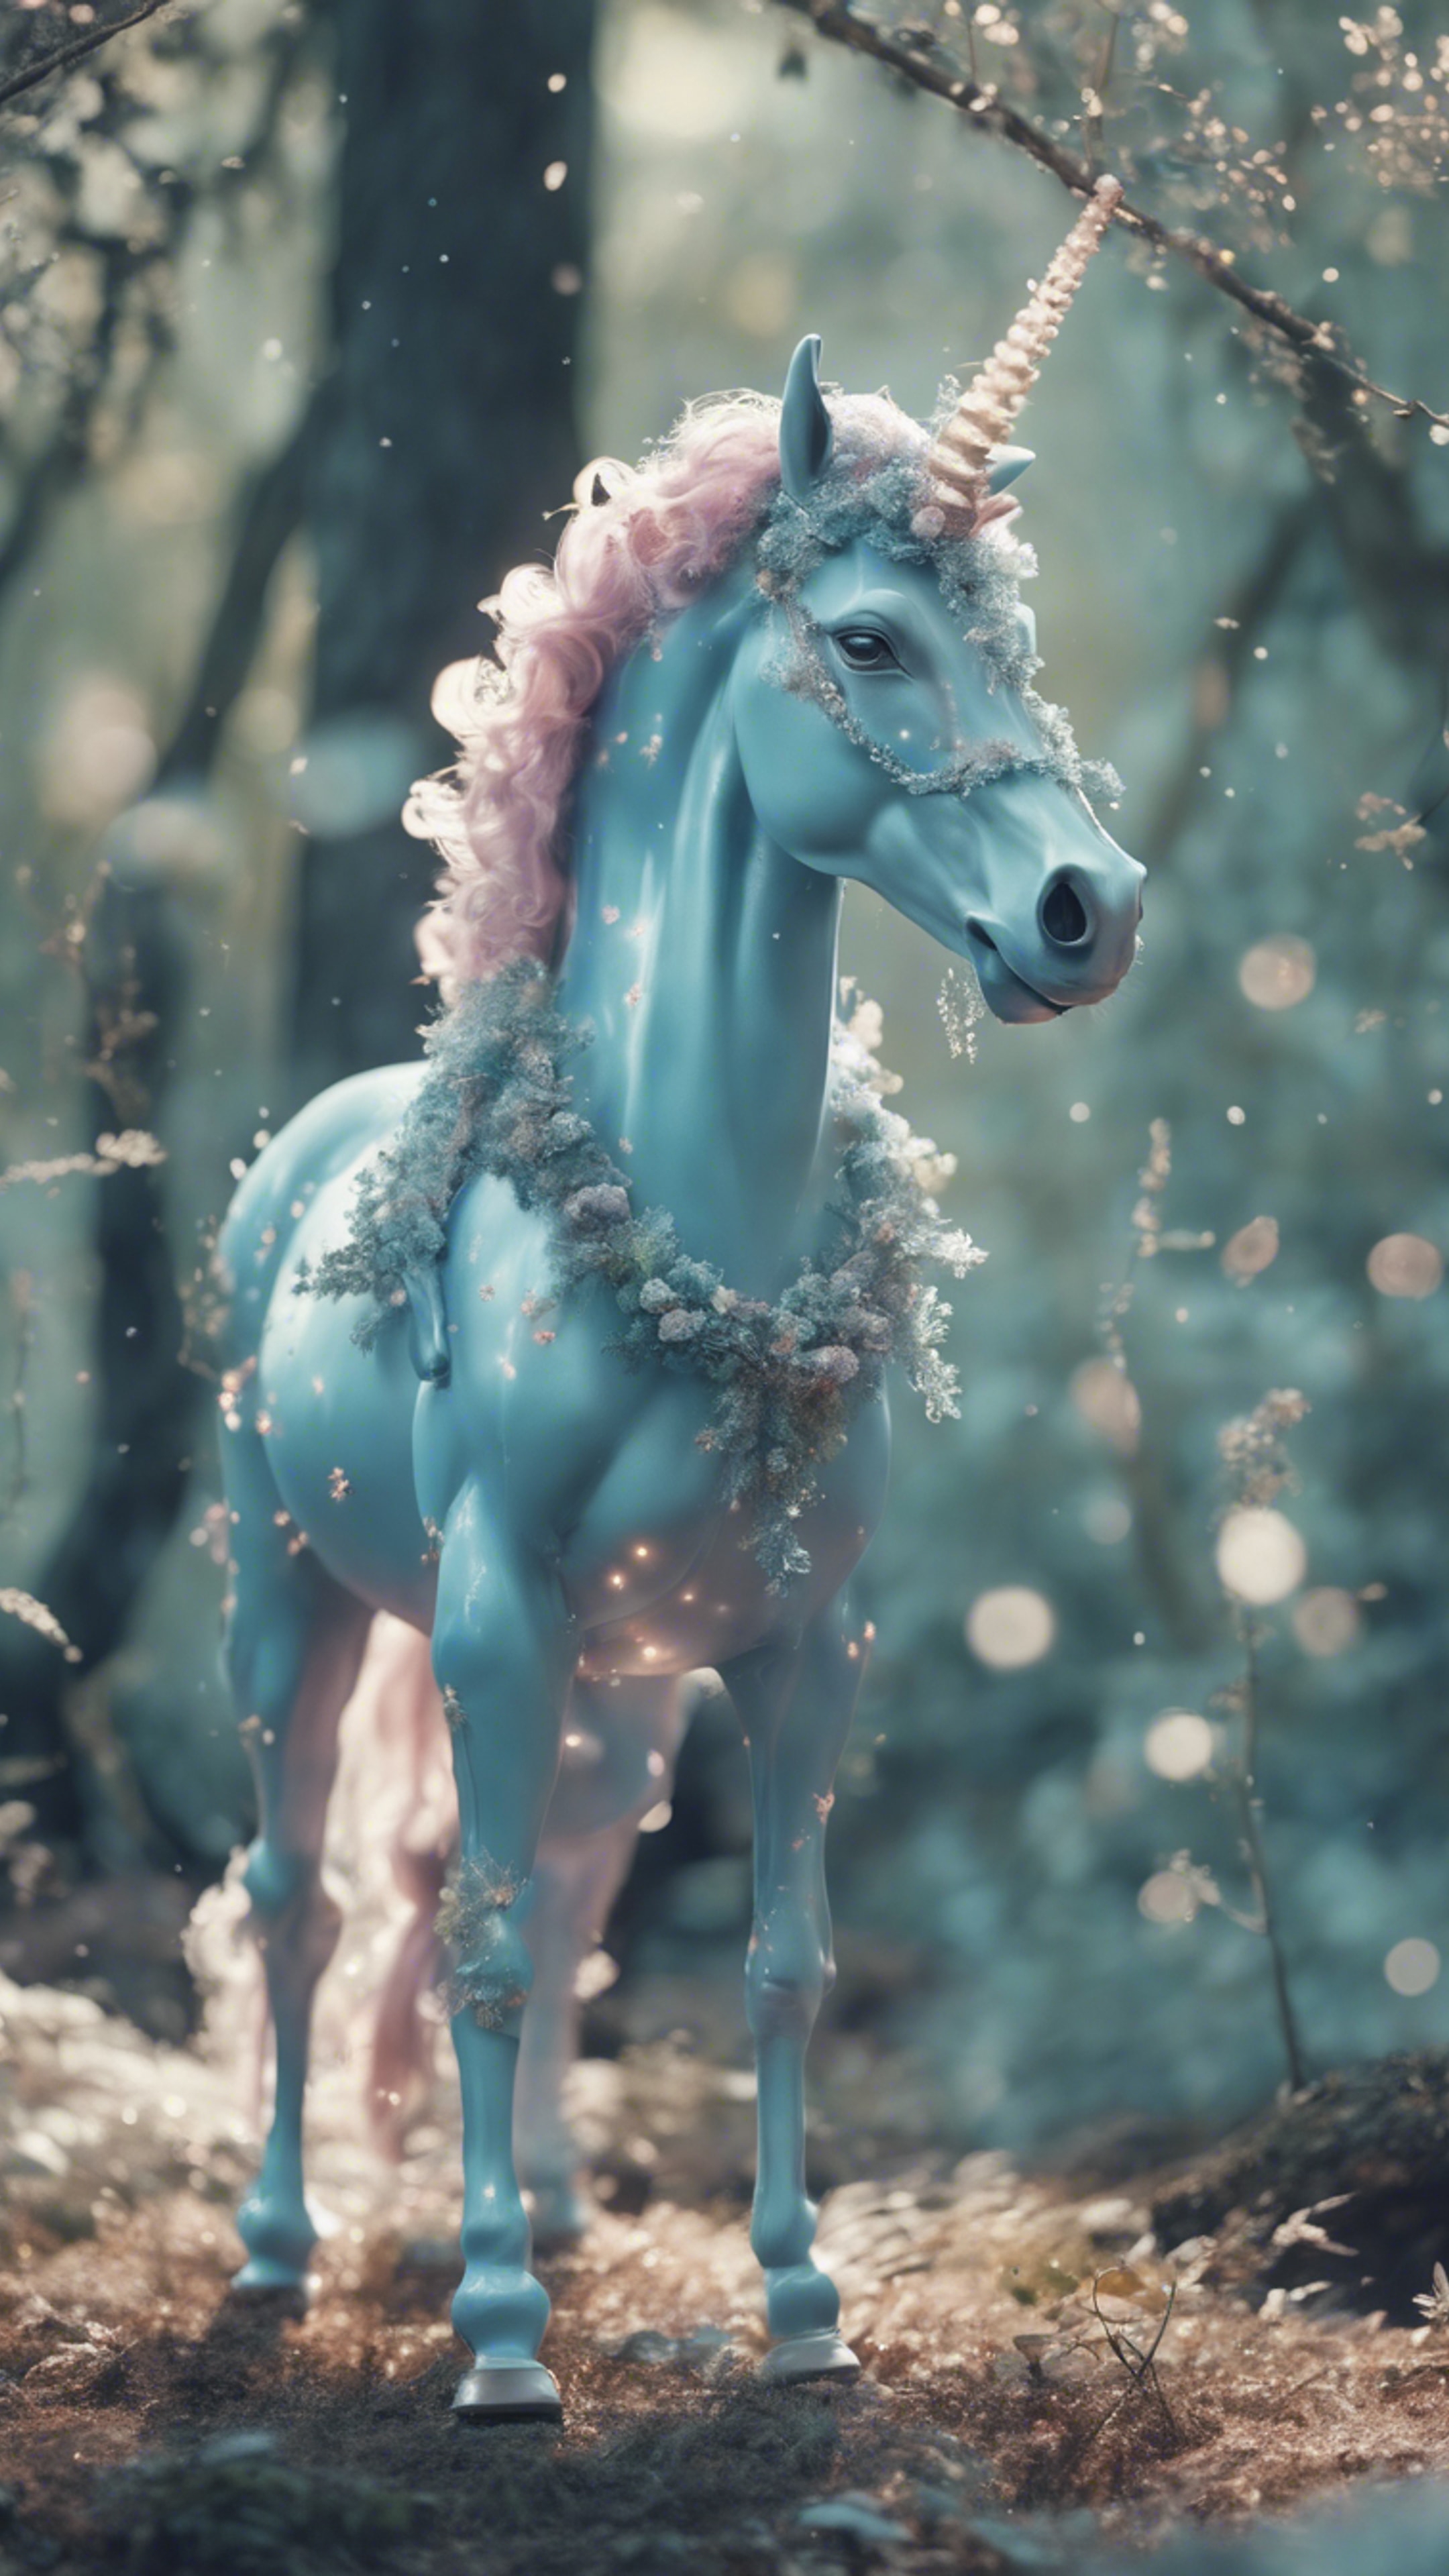 A whimsical pastel blue unicorn standing in a magical forest. 牆紙[9fc4aee892994beaa25a]